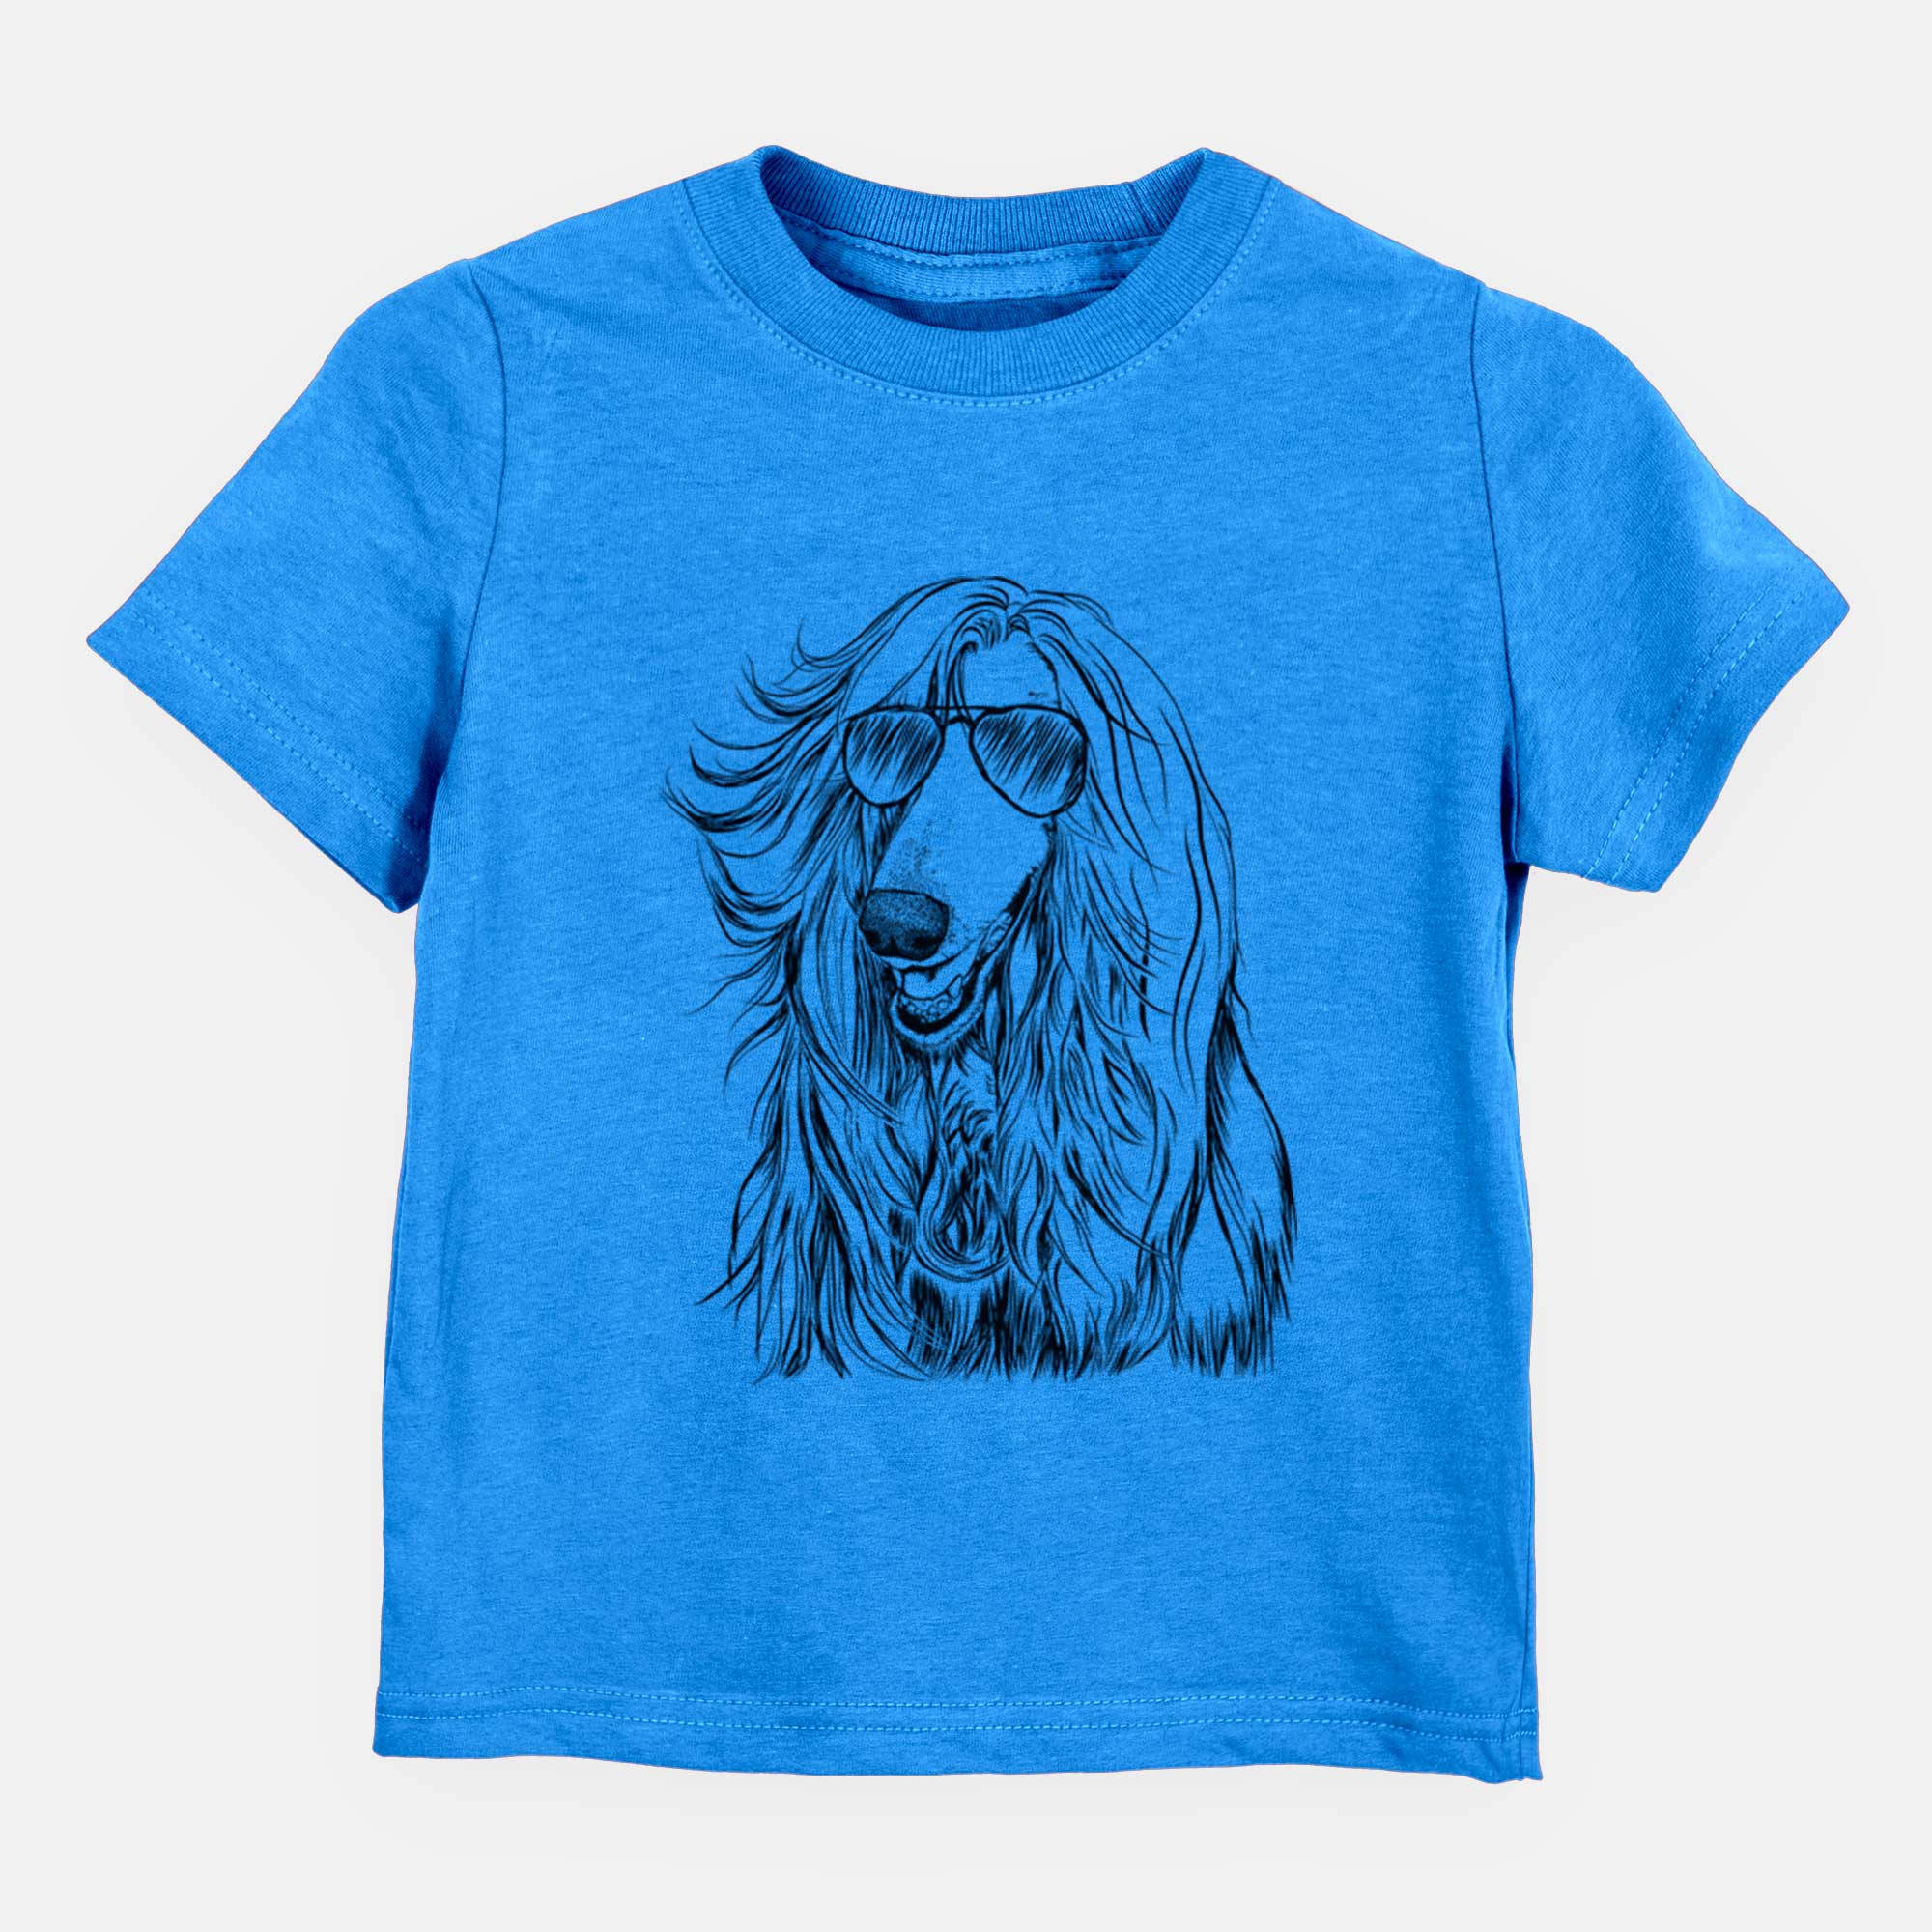 Aviator Sterling the Afghan Hound - Kids/Youth/Toddler Shirt